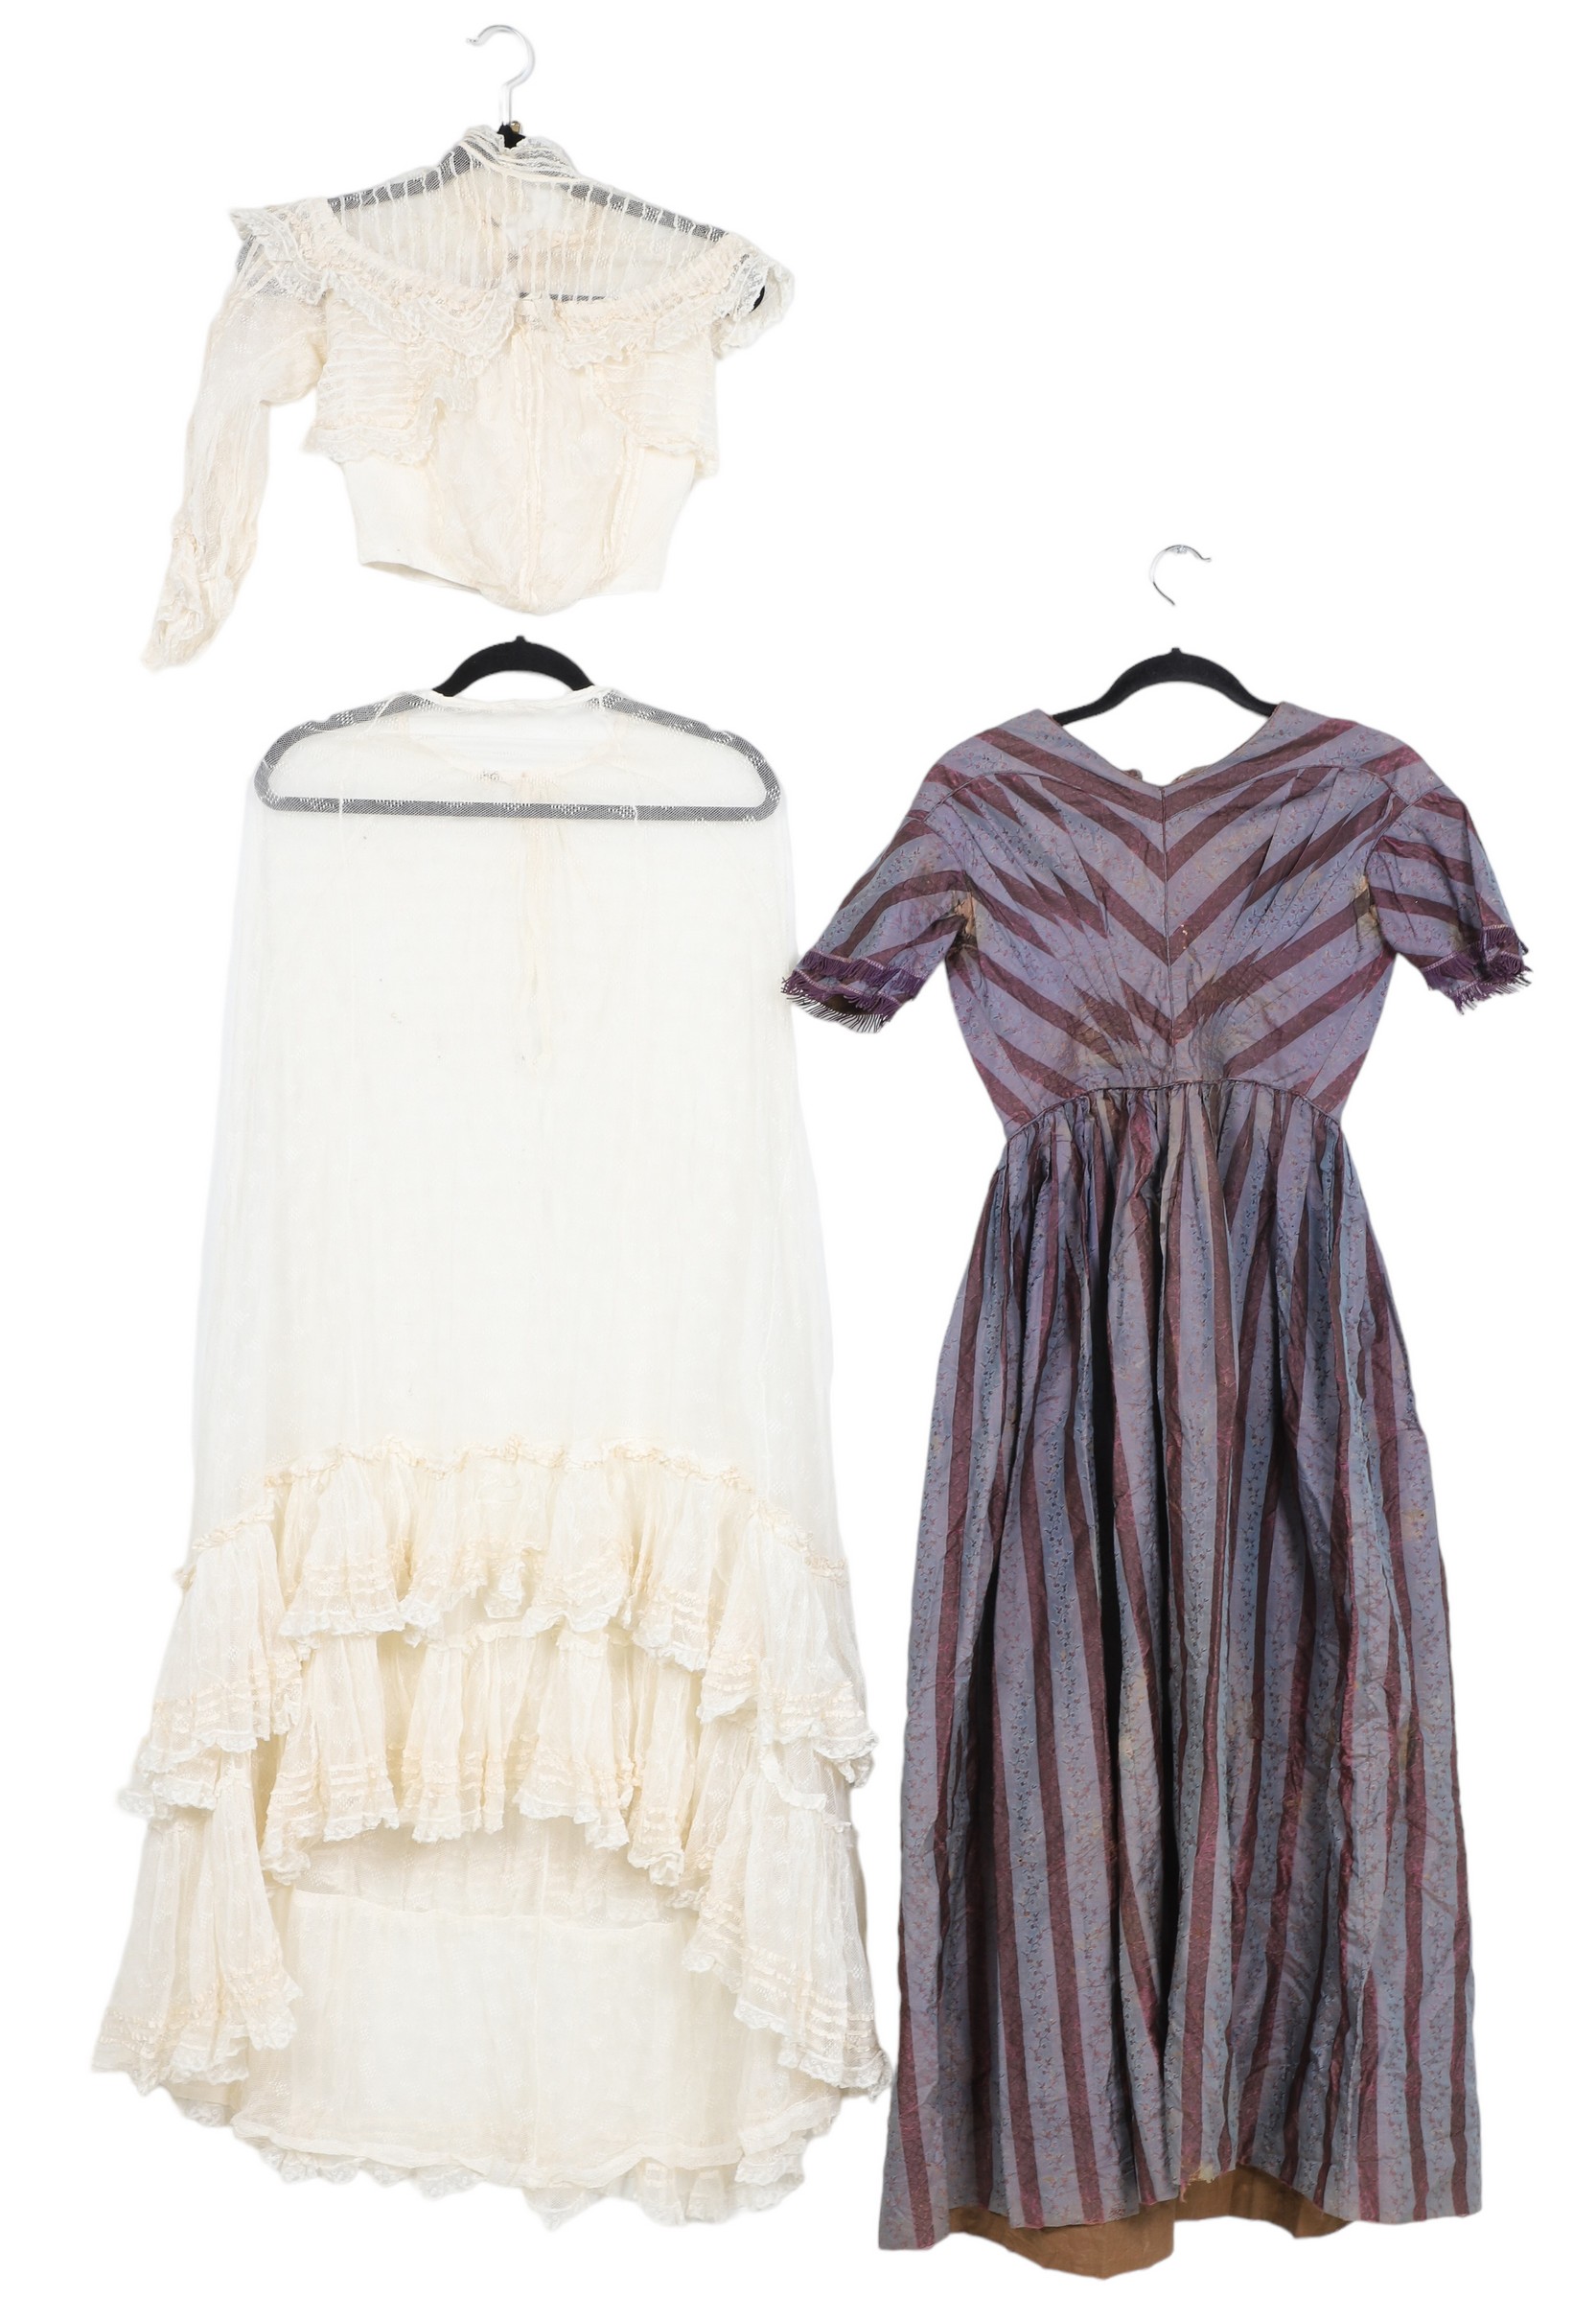 (2) 19th and 20th c dresses to